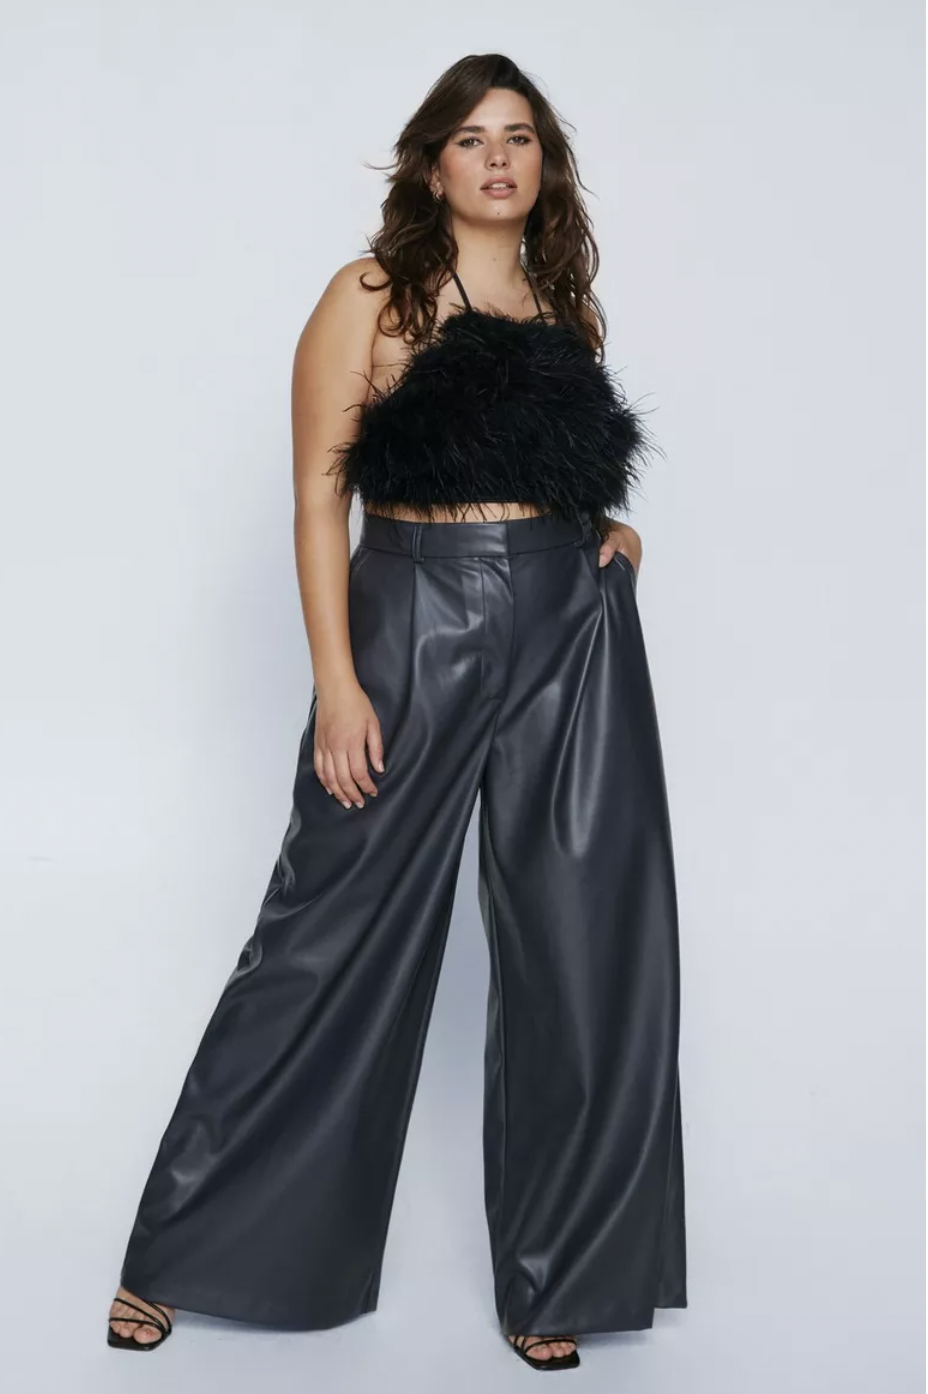 Plus Size Leather Pants - Bloomingdale's